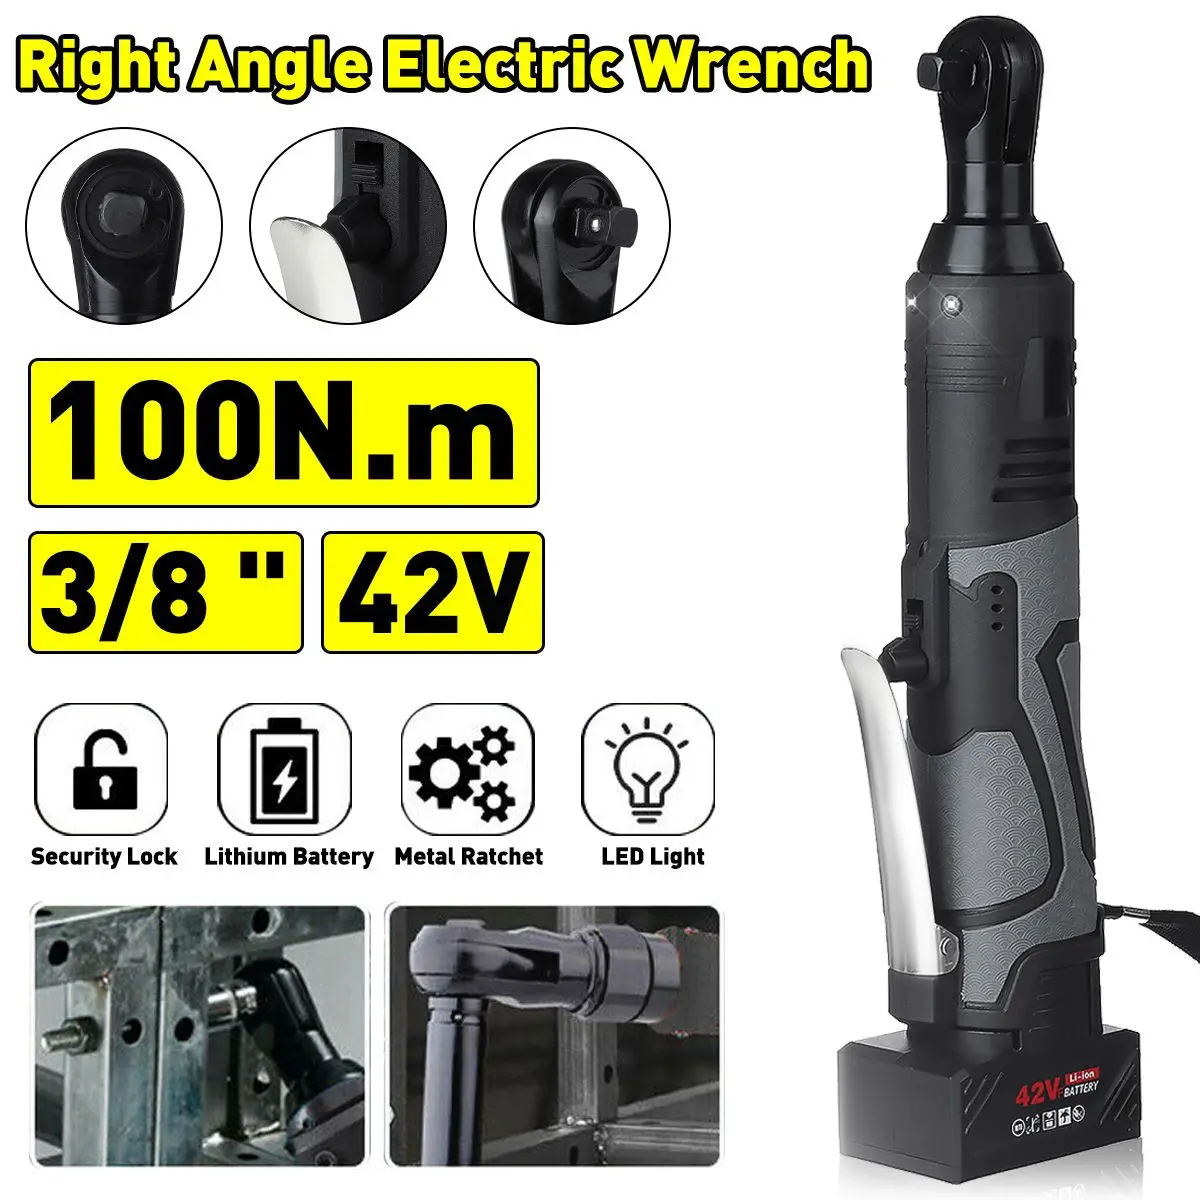 100N.m Electric Wrench 42V Cordless Ratchet Rechargeable Scaffolding Right Angle Wrench 3/8" with 2 Battery Charger Power Tool